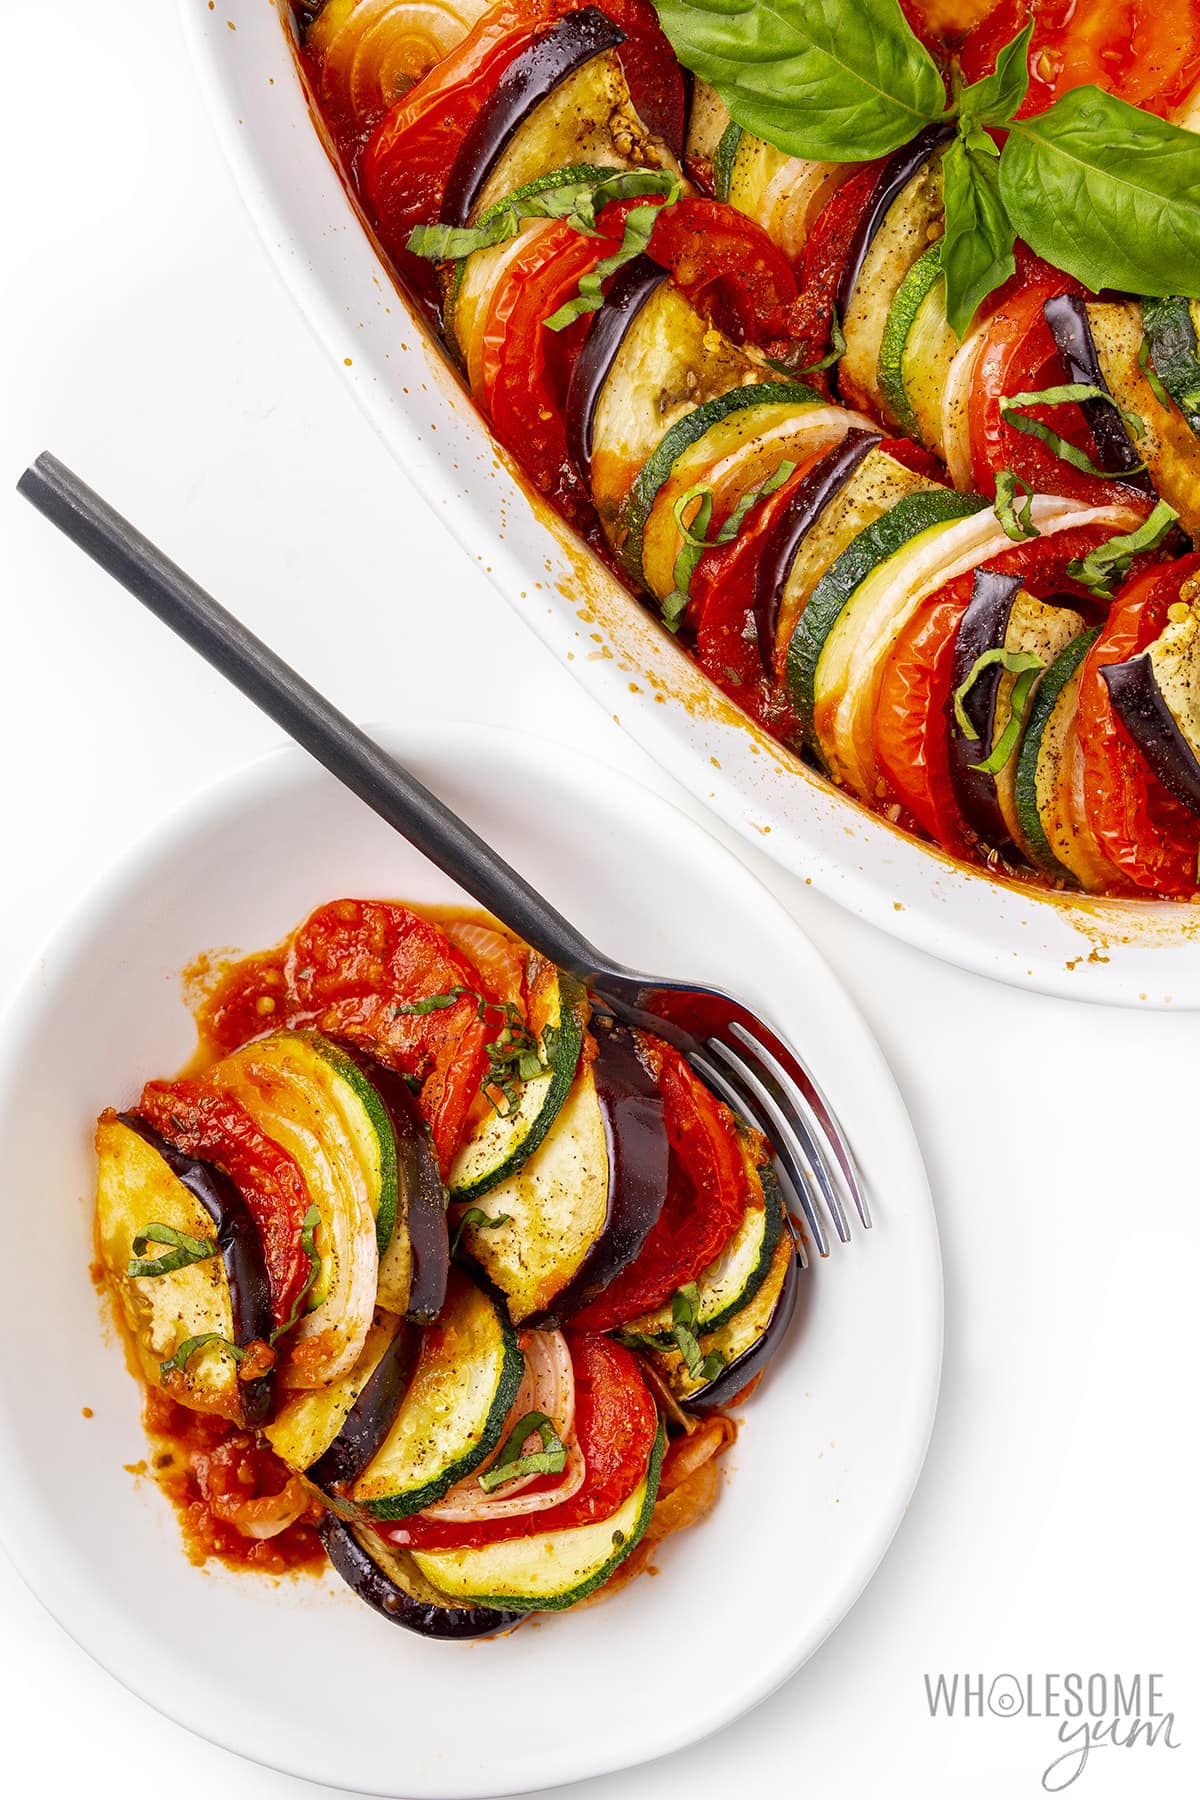 Ratatouille served up on a plate with a fork.